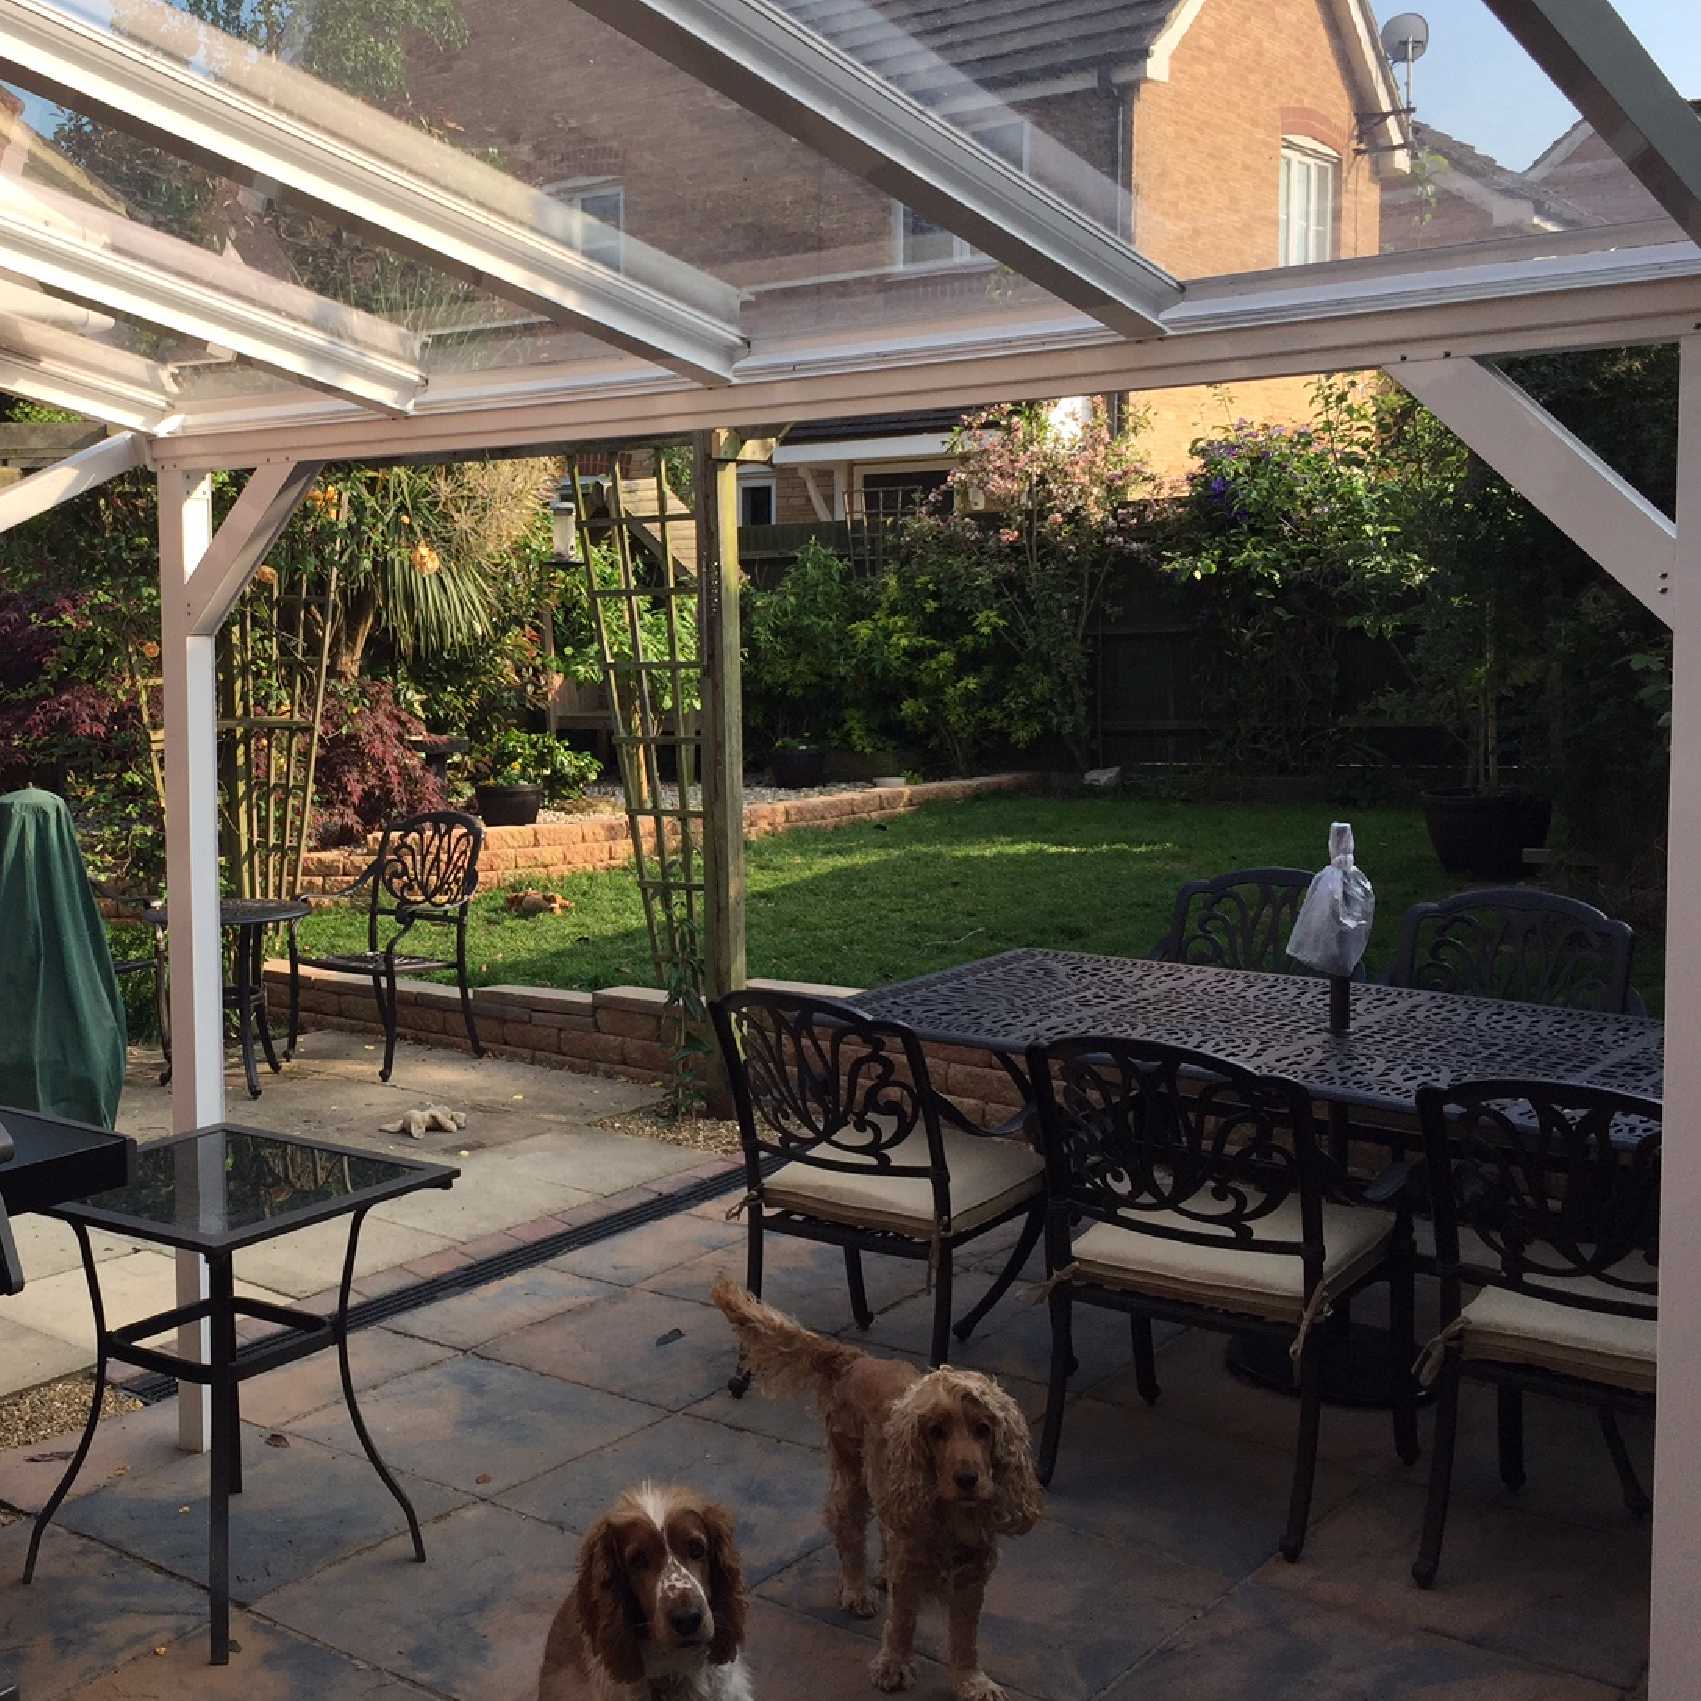 Affordable Omega Smart Lean-To Canopy, White UNGLAZED for 6mm Glazing - 8.4m (W) x 1.5m (P), (4) Supporting Posts